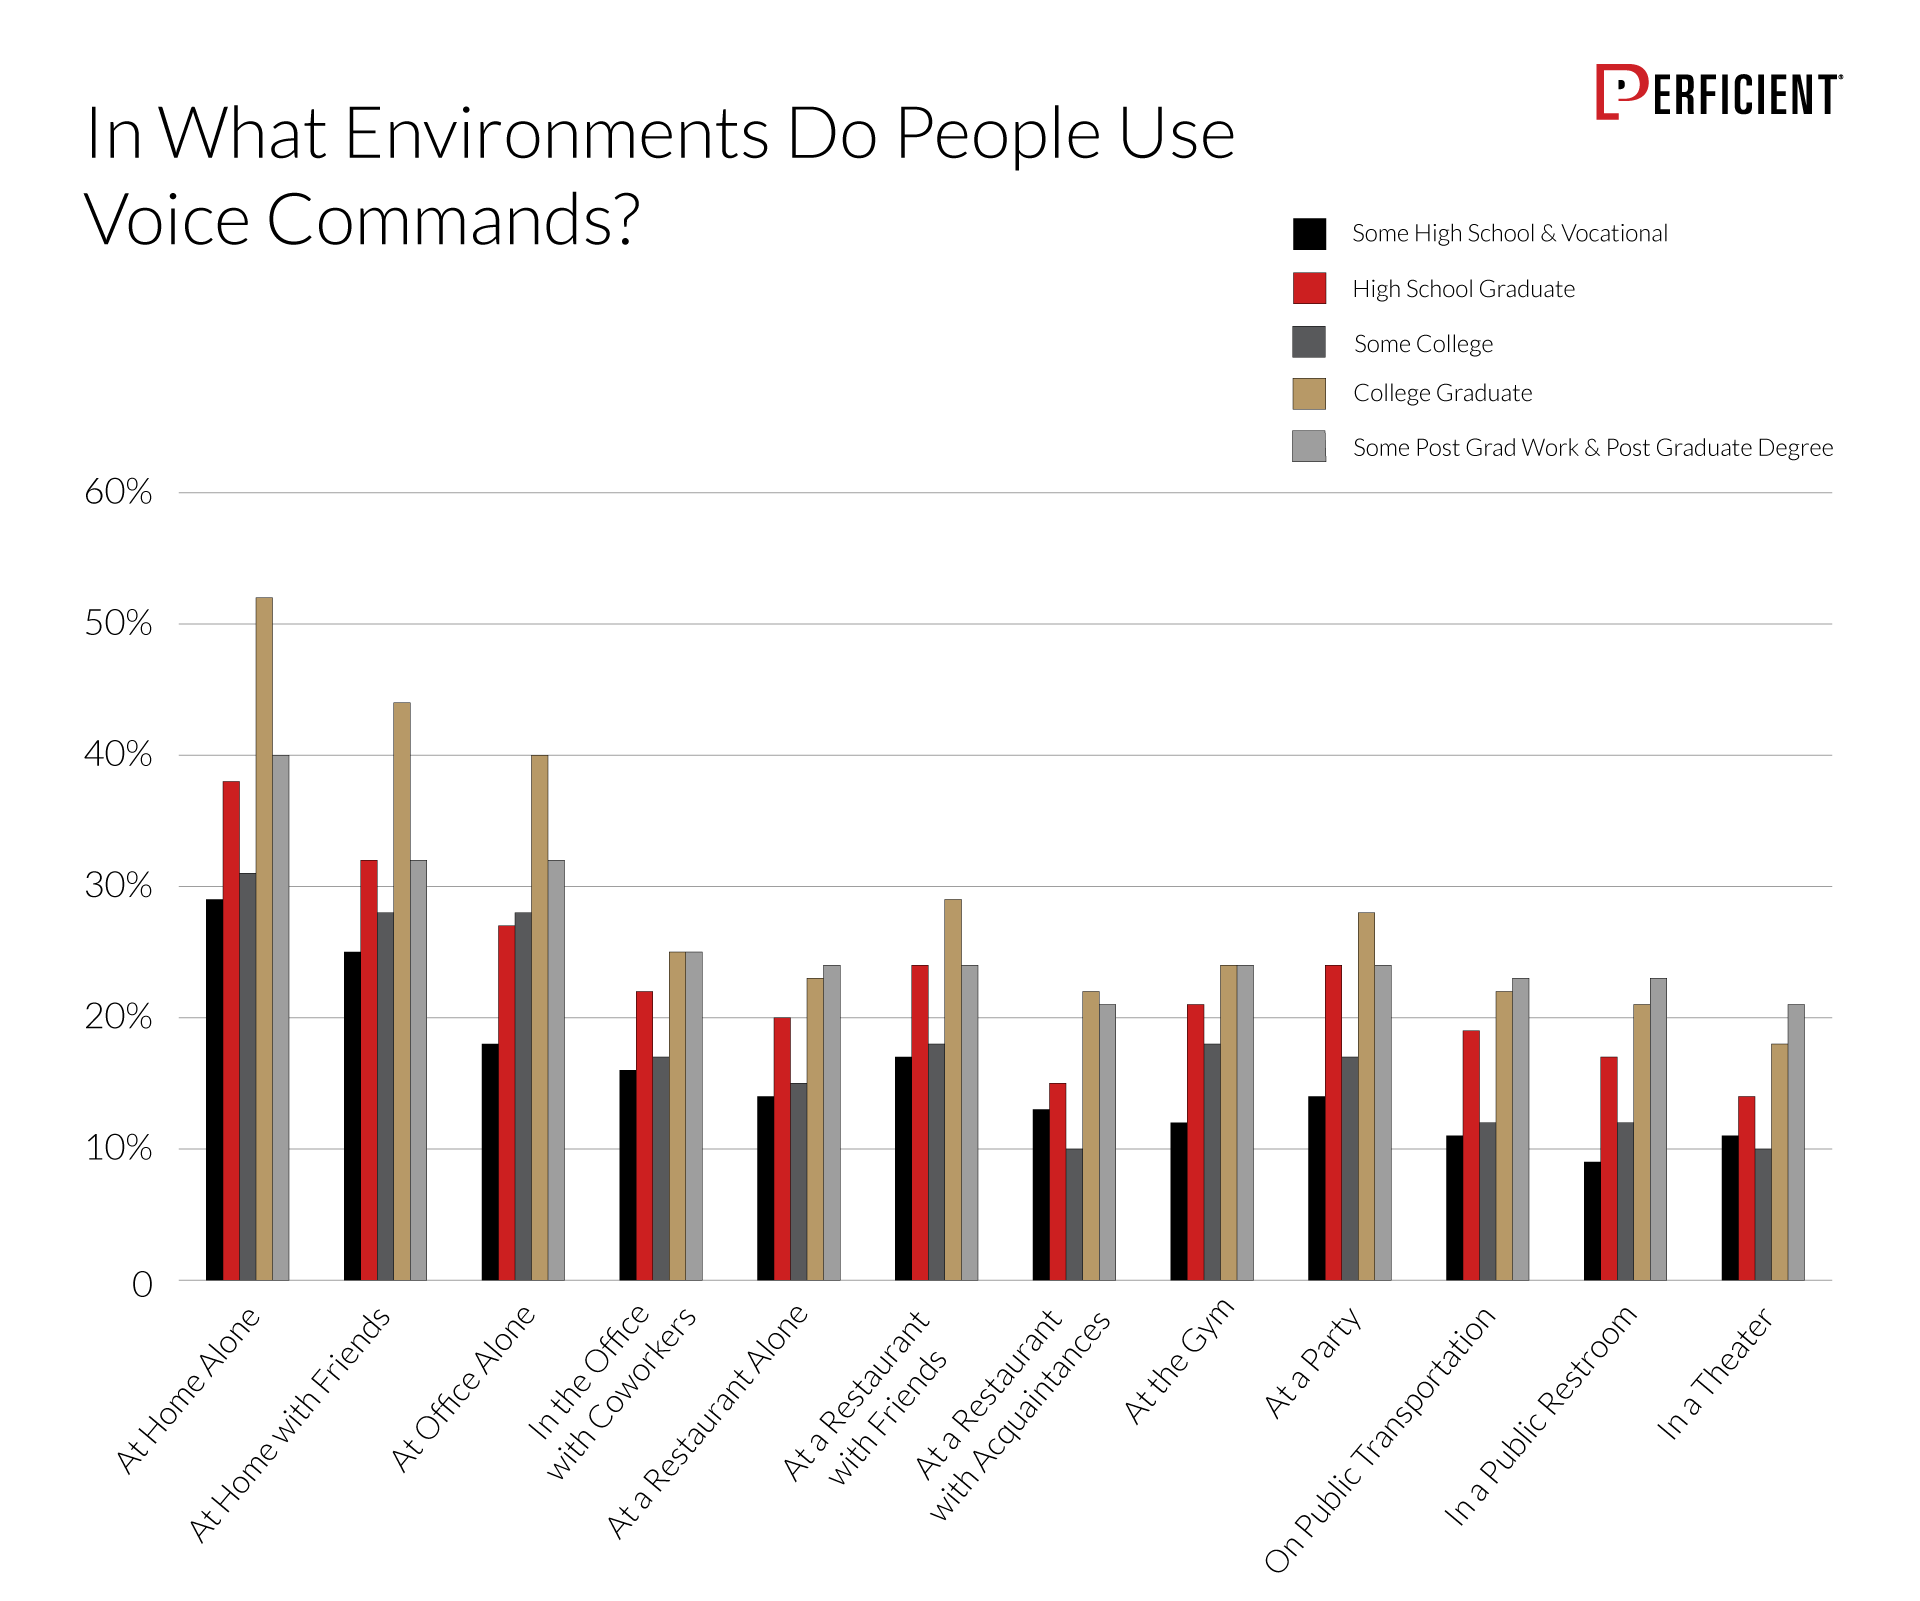  How likely people would use voice commands in different environments by education level